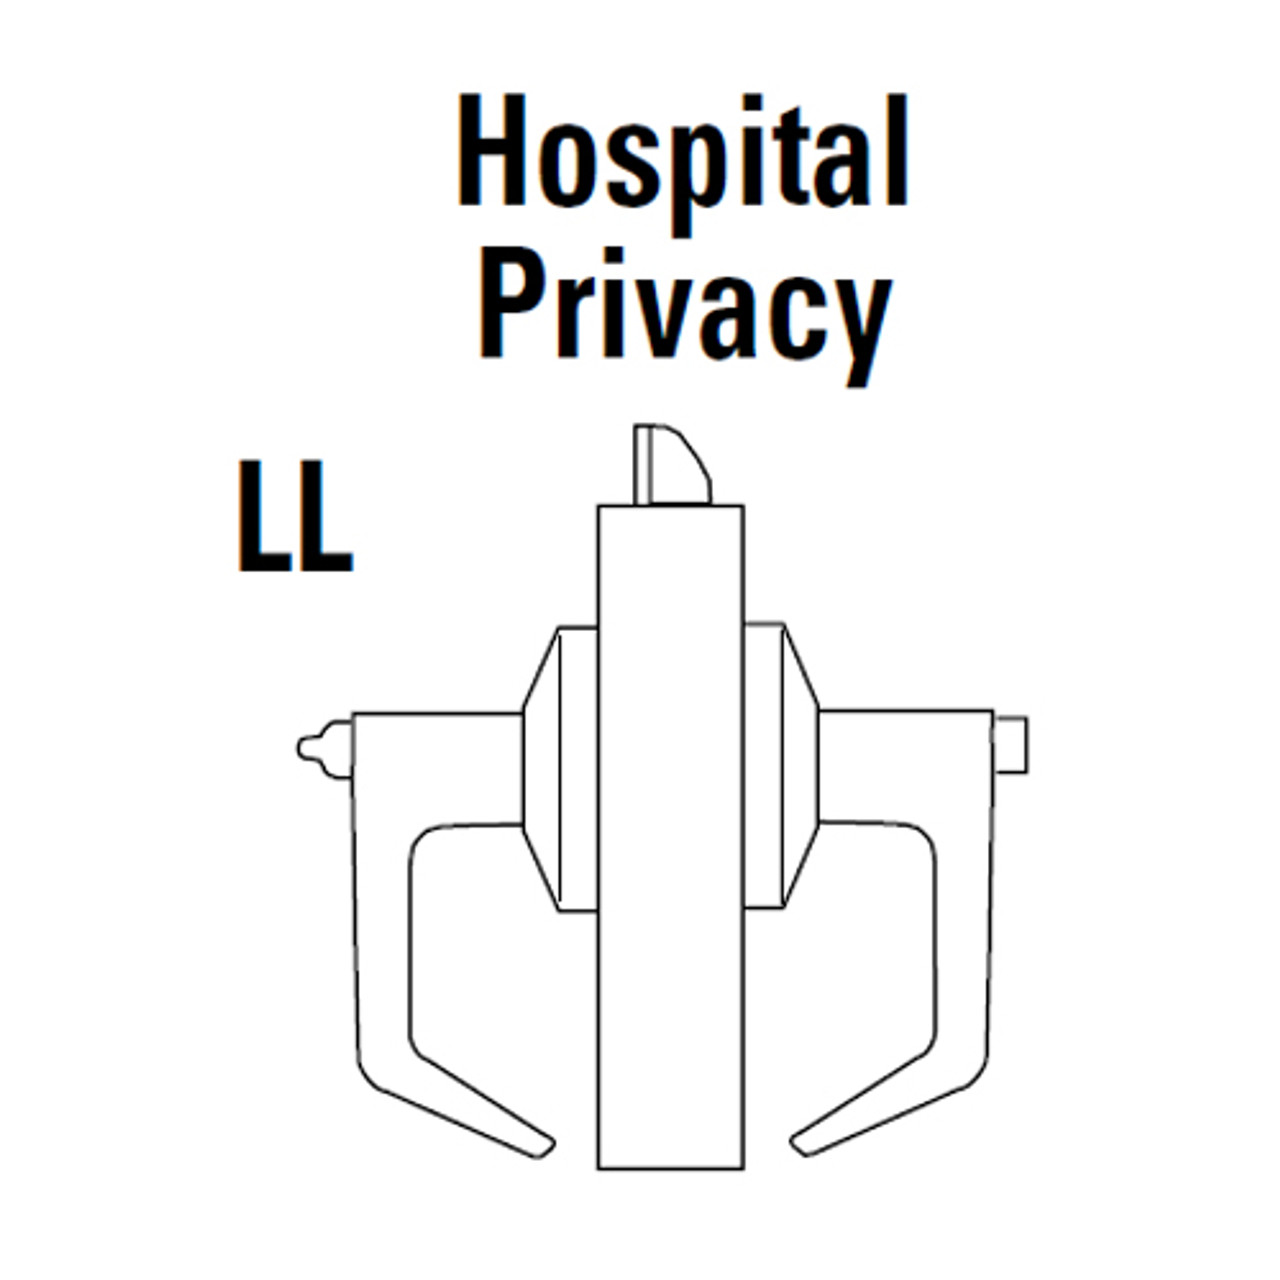 9K40LL15CS3626 Best 9K Series Hospital Privacy Heavy Duty Cylindrical Lever Locks with Contour Angle with Return Lever Design in Satin Chrome